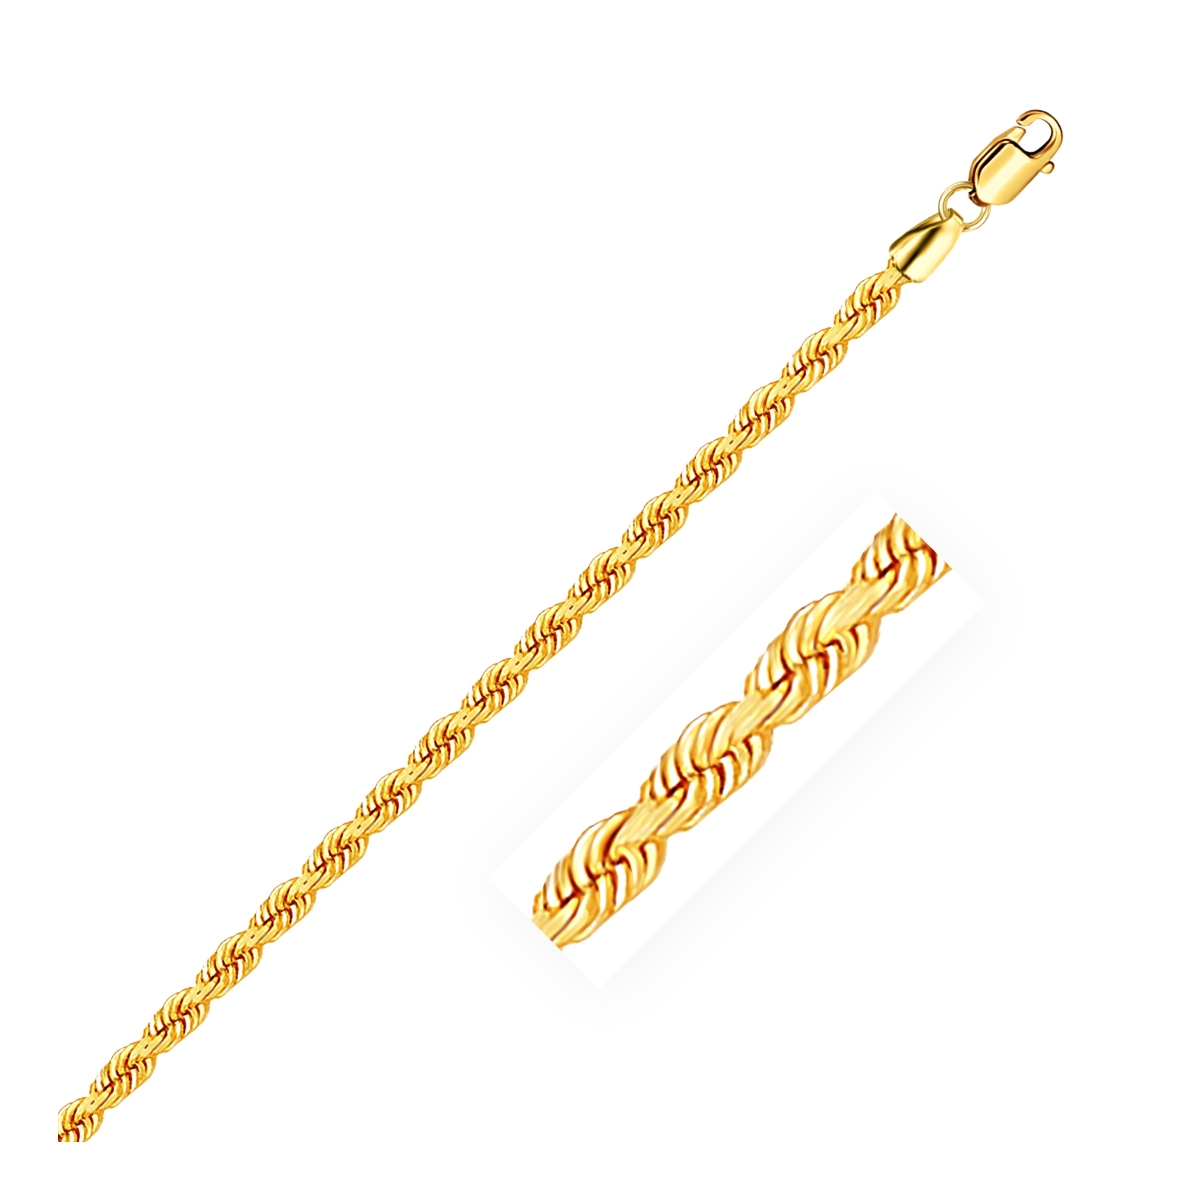 D163426-24 3 Mm 14k Yellow Gold Solid Rope Chain - Size 24 In.